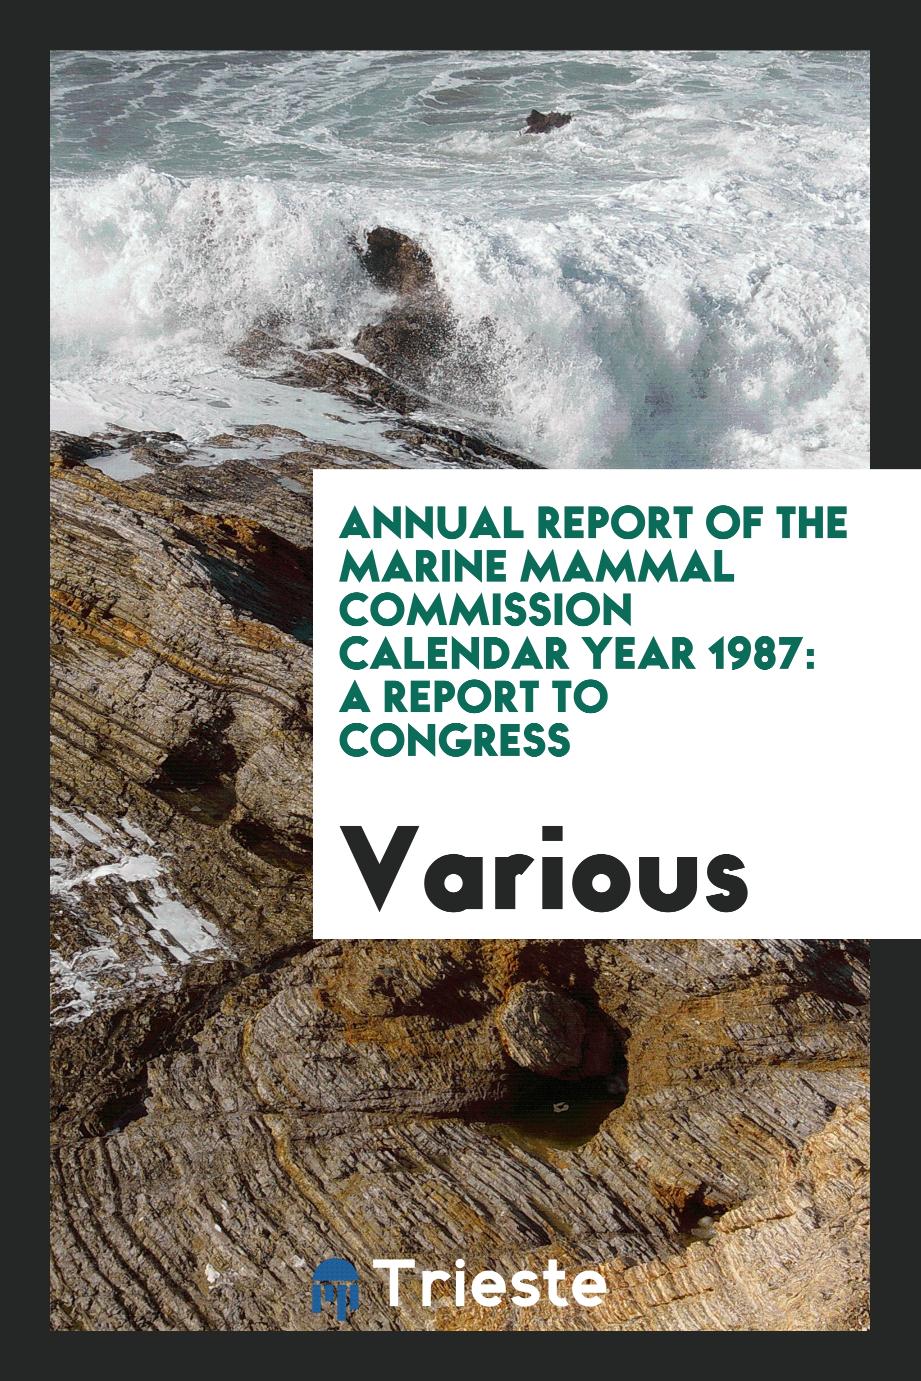 Annual report of the Marine Mammal Commission calendar year 1987: a report to Congress